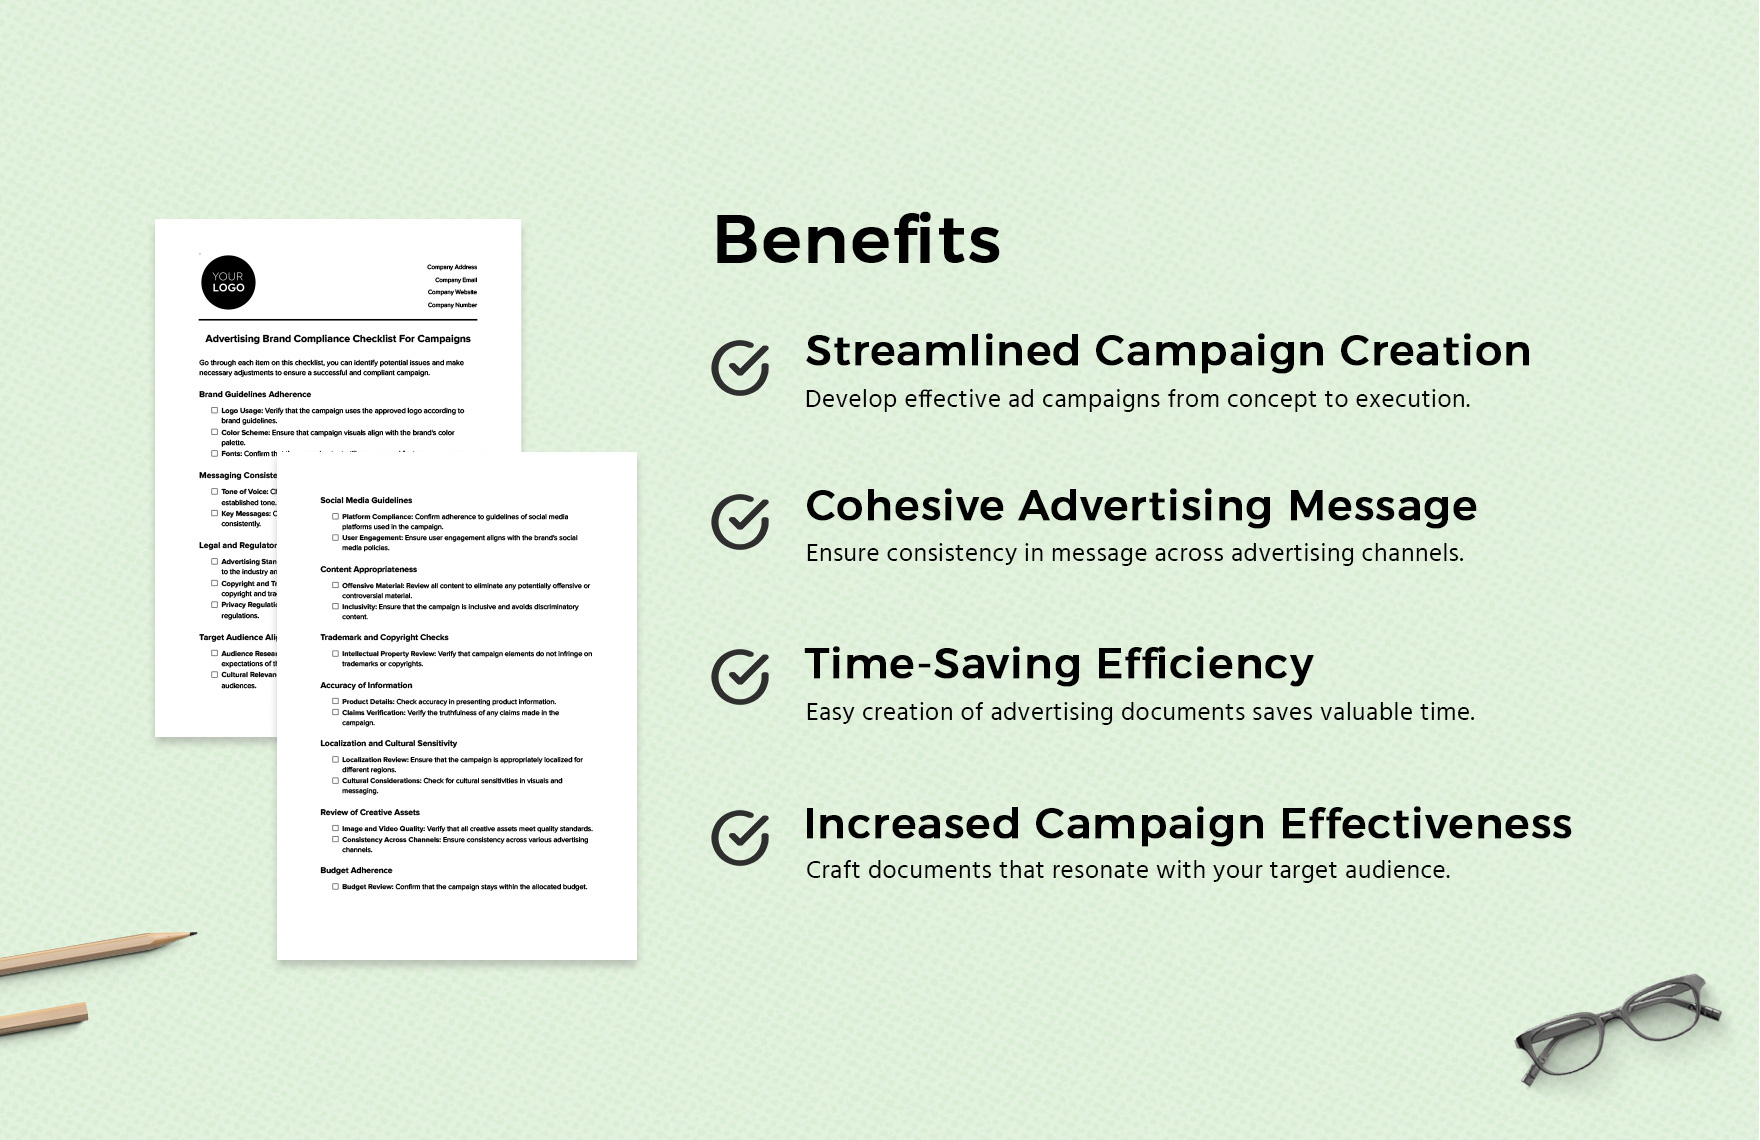 Advertising Brand Compliance Checklist for Campaigns Template